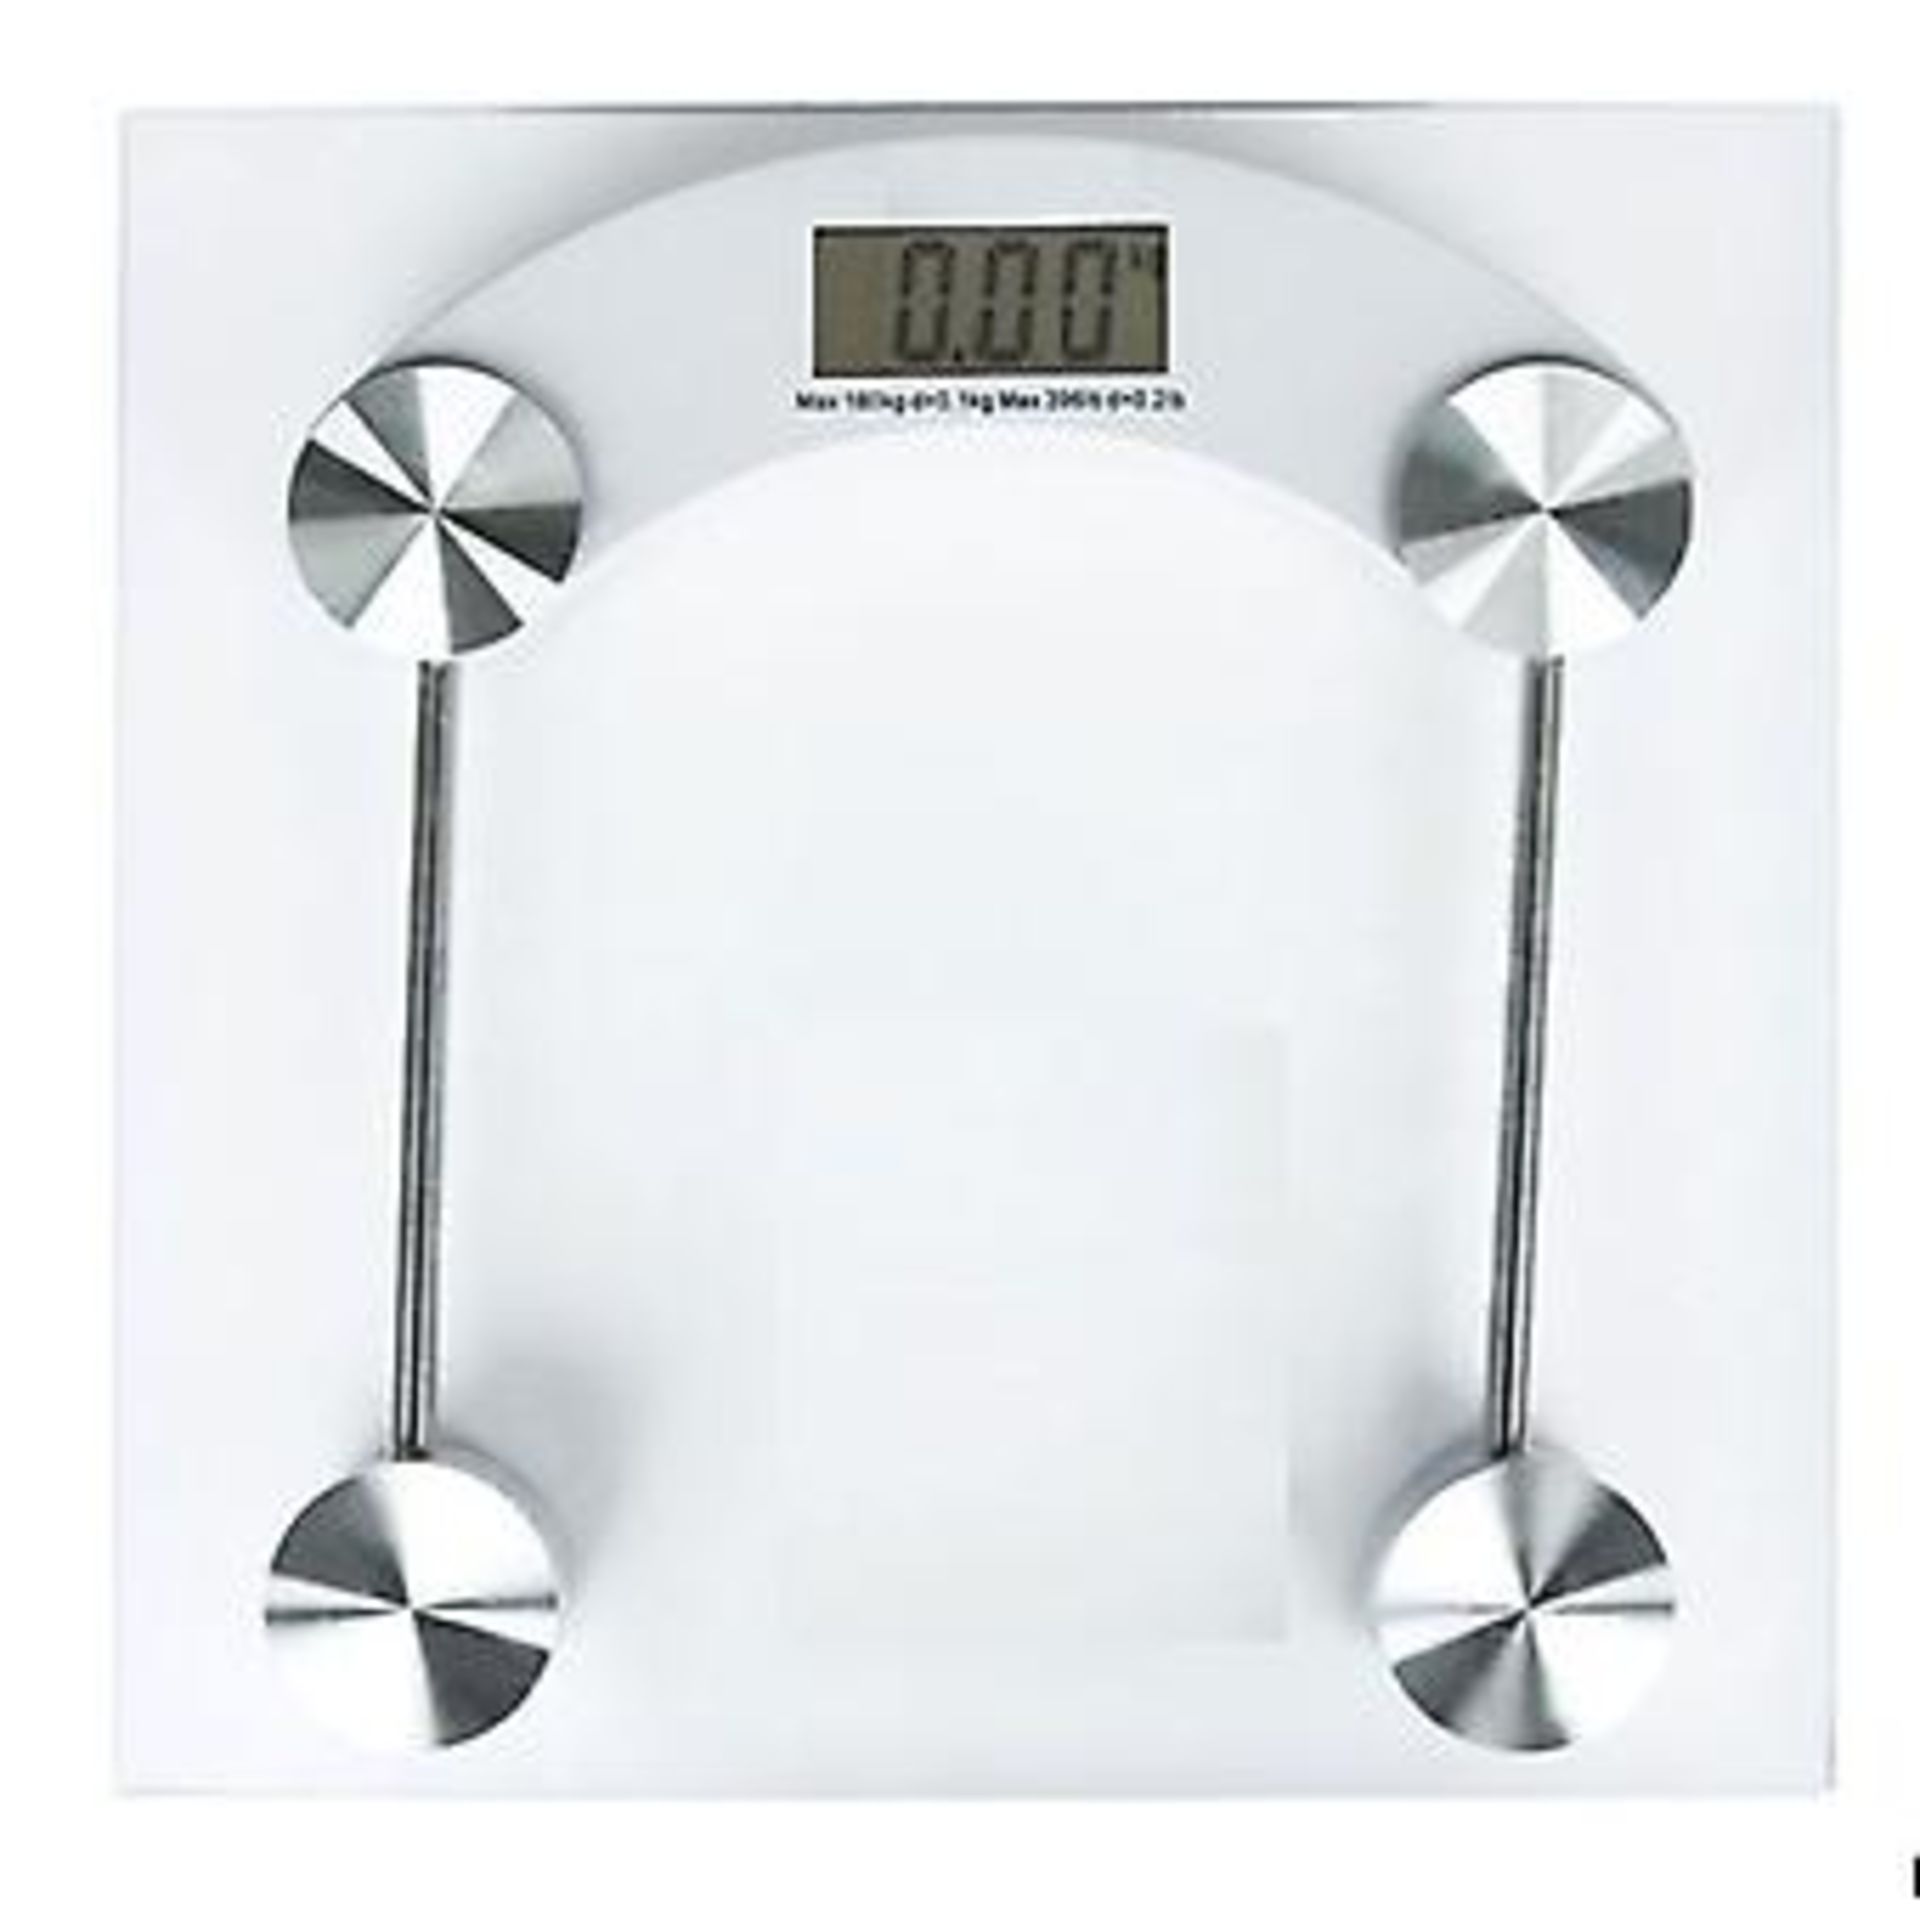 V Brand New 180KG Digital weighing Scales - Auto Off After 8 Seconds - Battery Operated - KG/LB